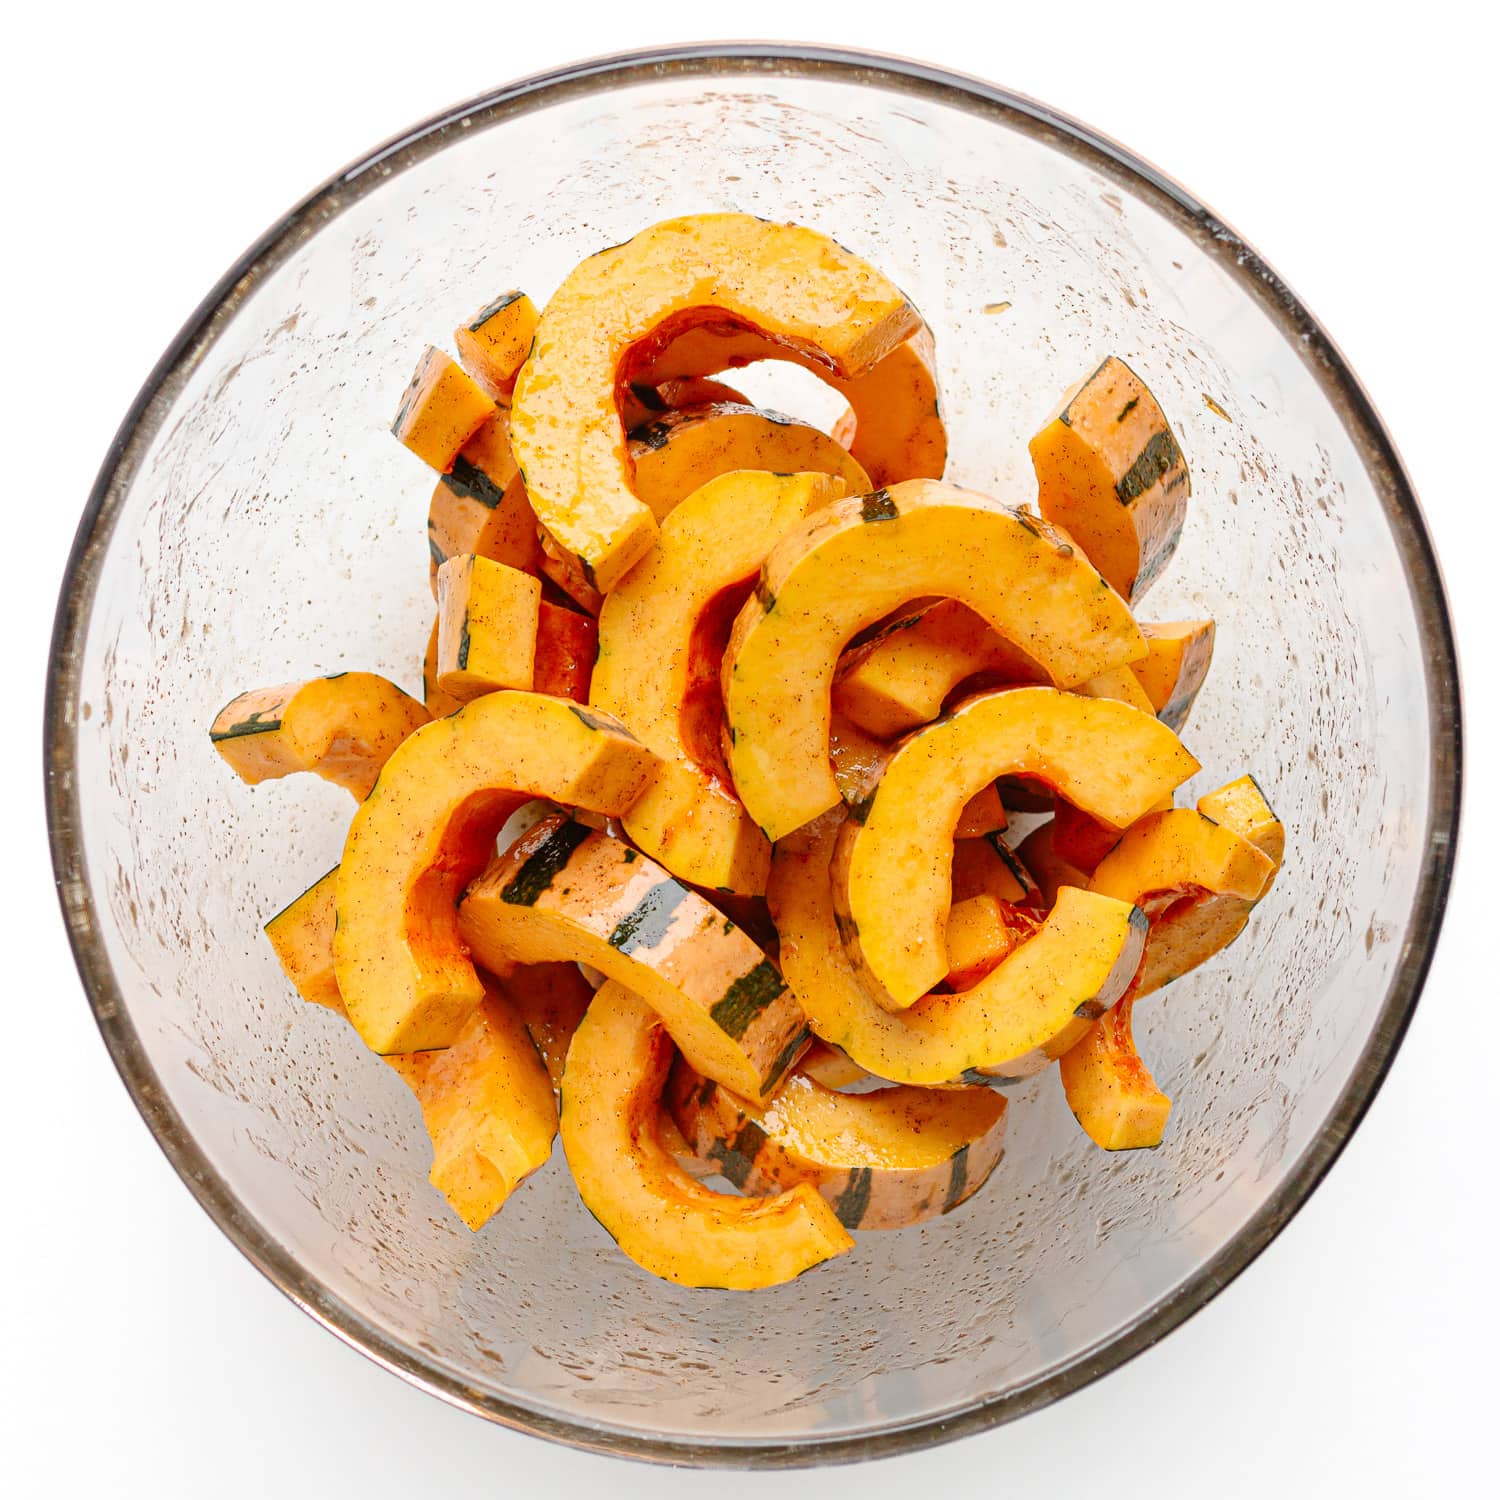 Slices of delicate squash coated in maple syrup mixture in a glass bowl.